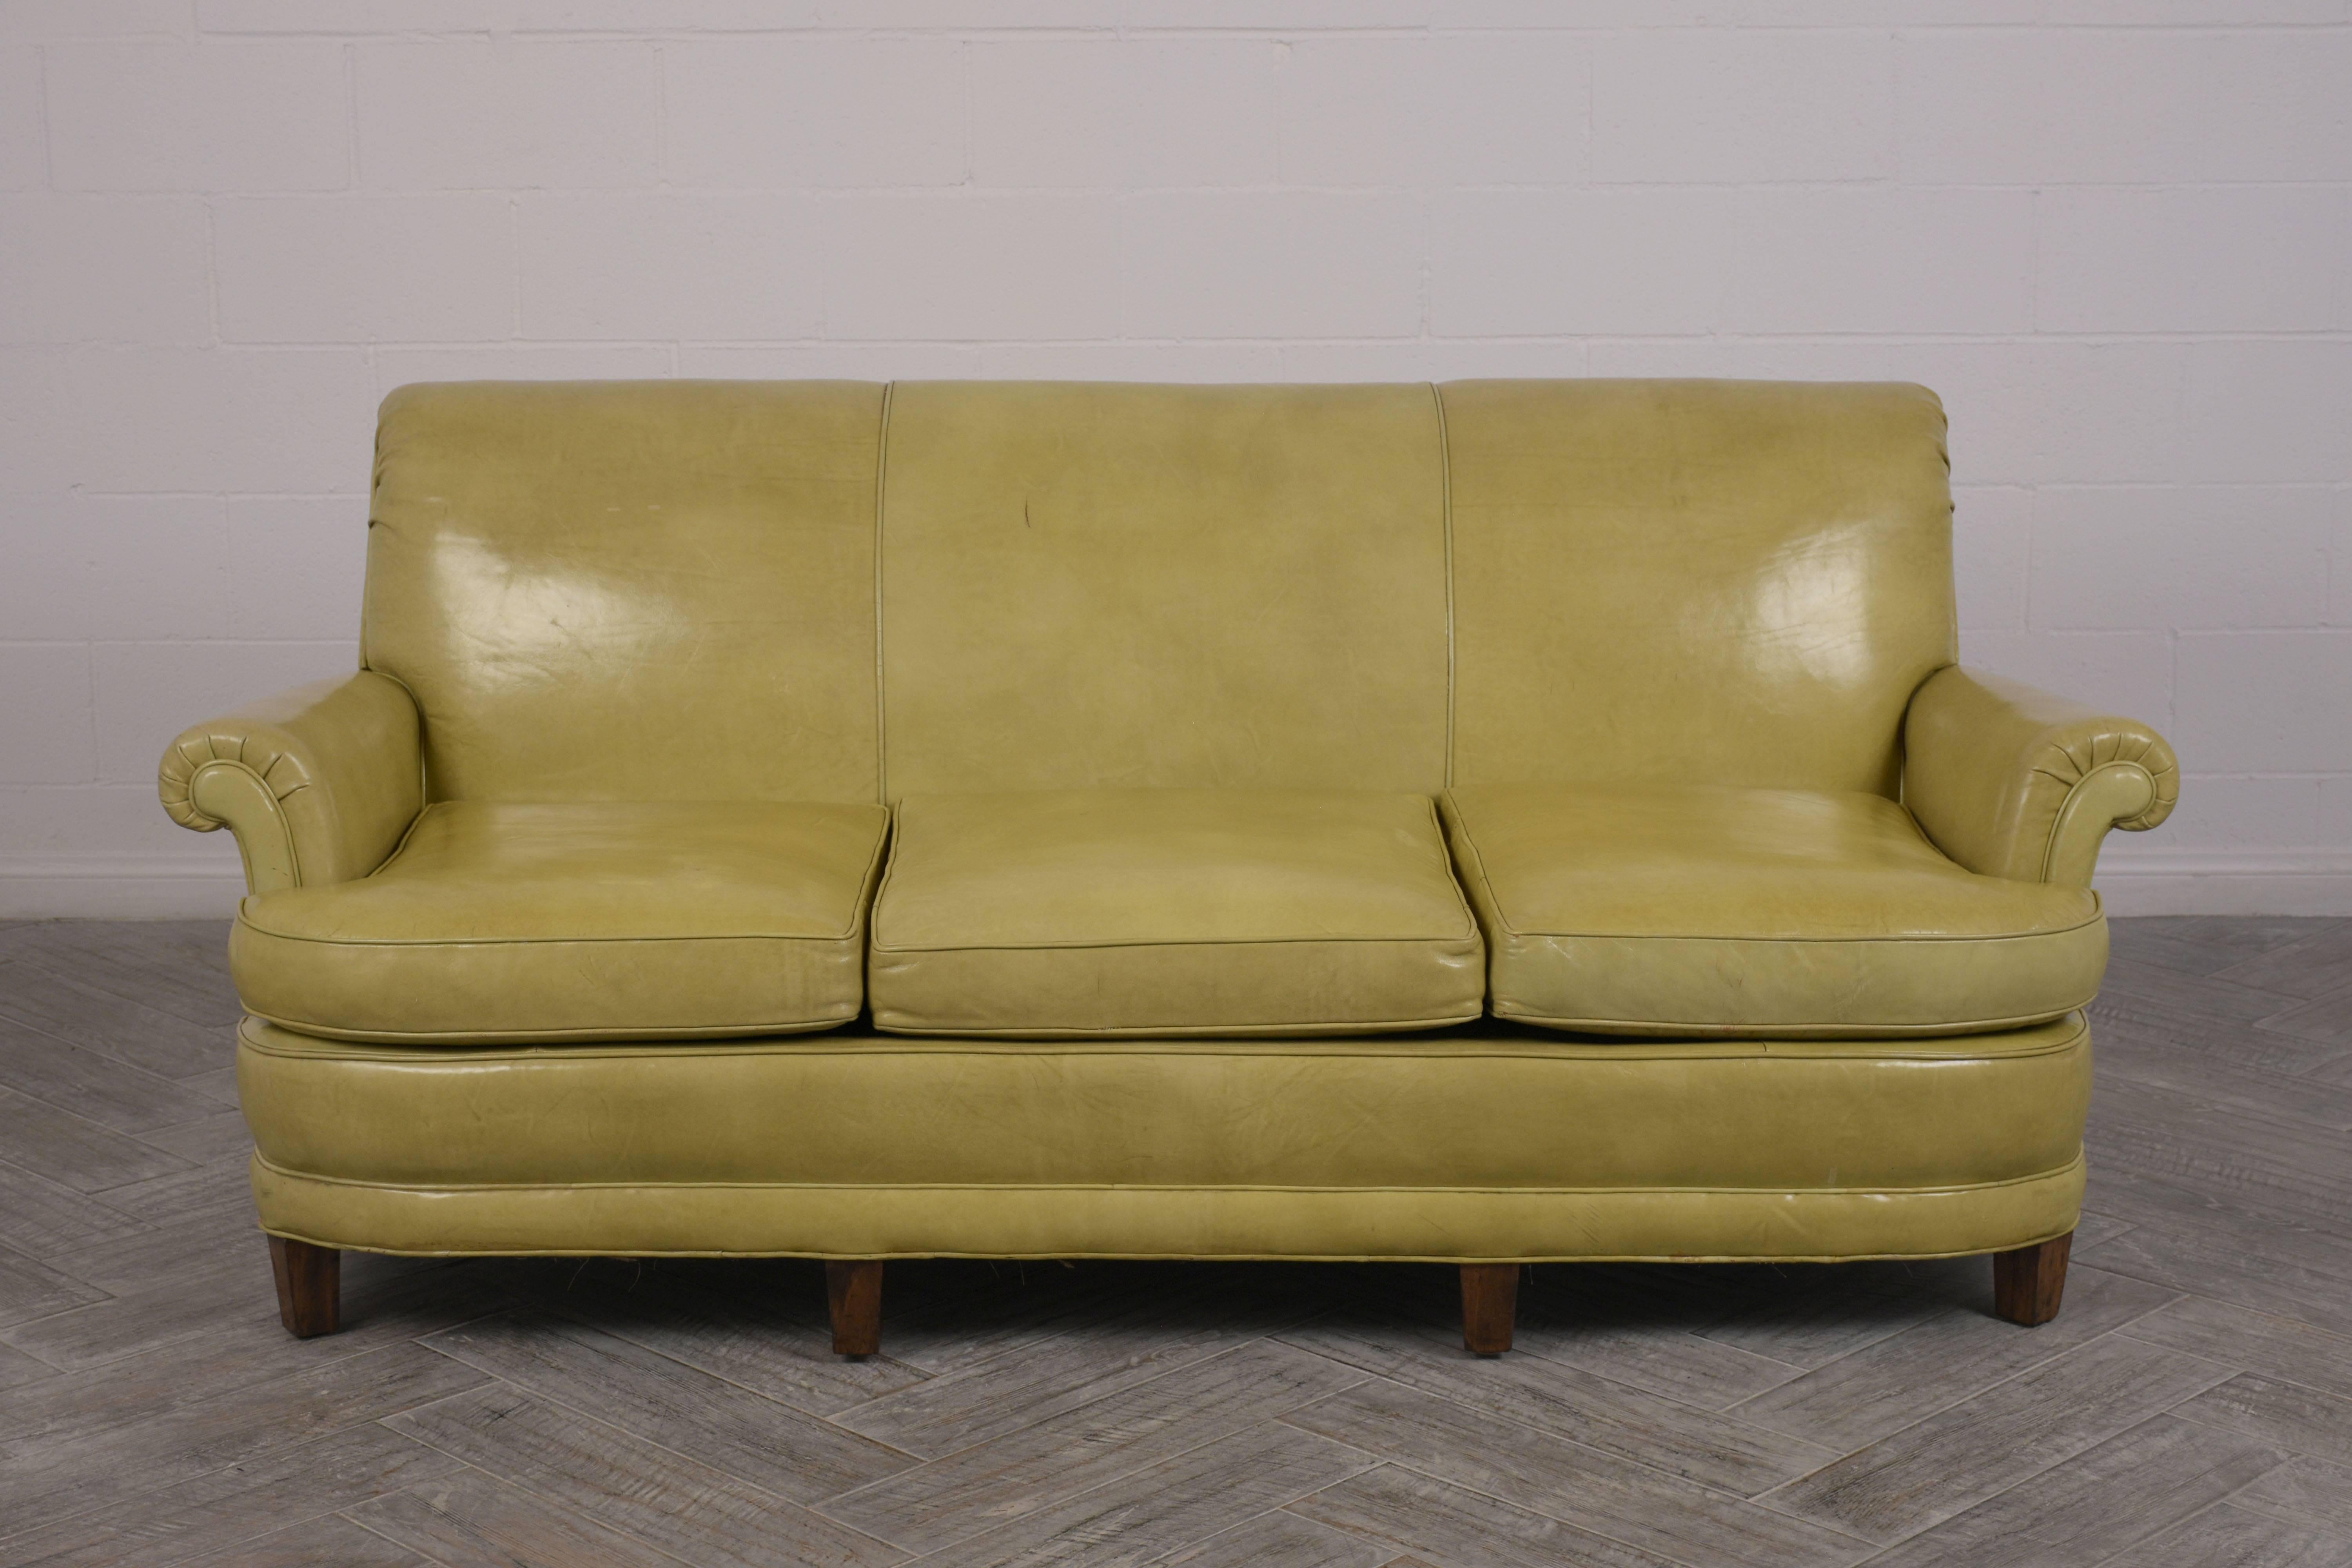 This Vintage Regency Style three-cushion Sofa has been newly restored and is upholstered in its original lemon green color leather in good condition. THe seats are very comfortable and rest on solid wood legs with a walnut finish. This 1960's